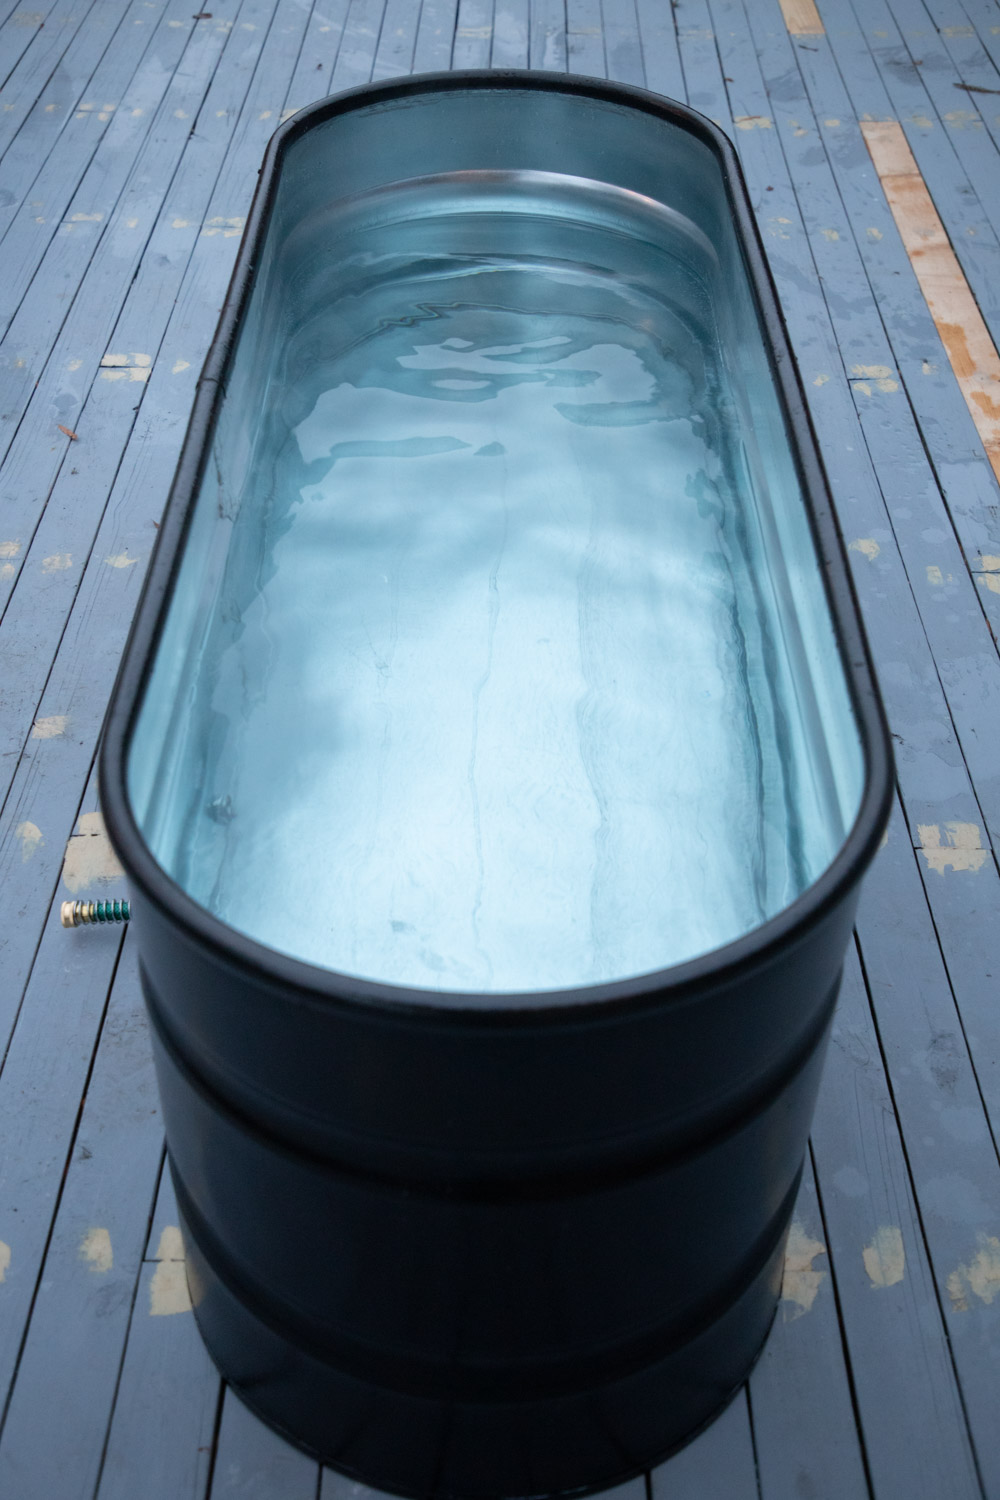 How to Build a Stock Tank Hot Tub for $657